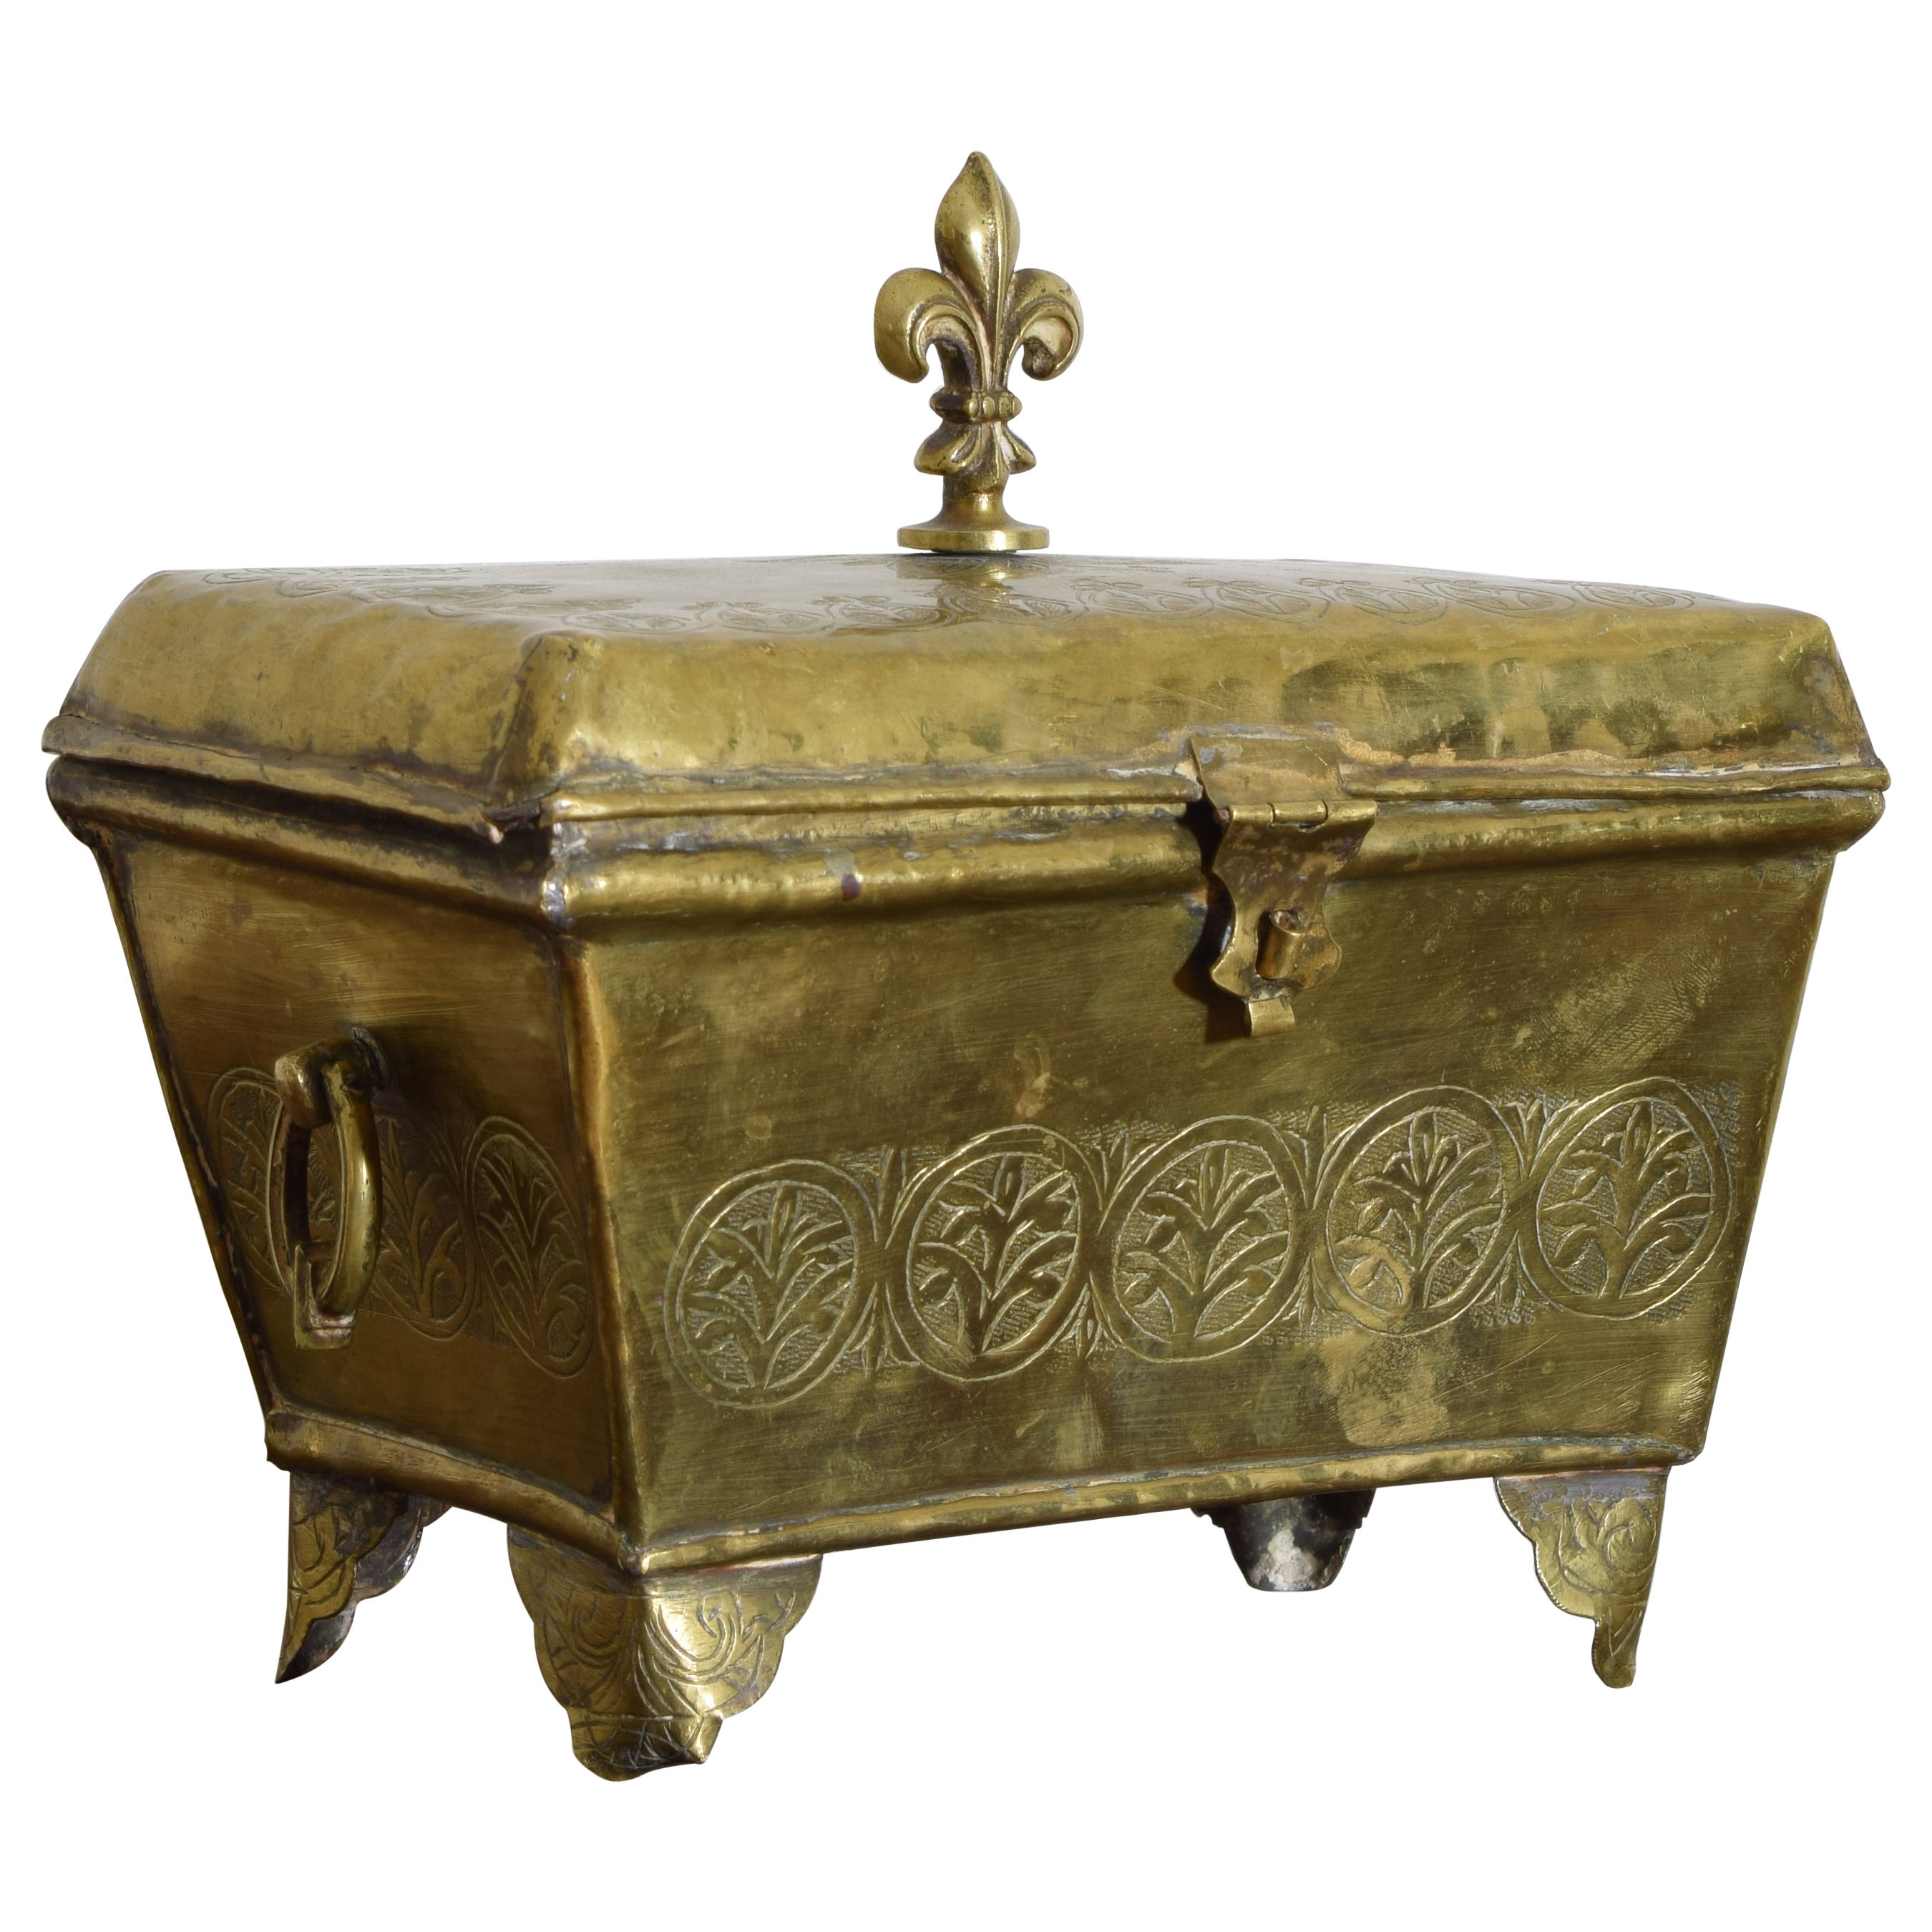 French Louis XIV Period HInged Incised Brass Keeping Box, early 18th century For Sale